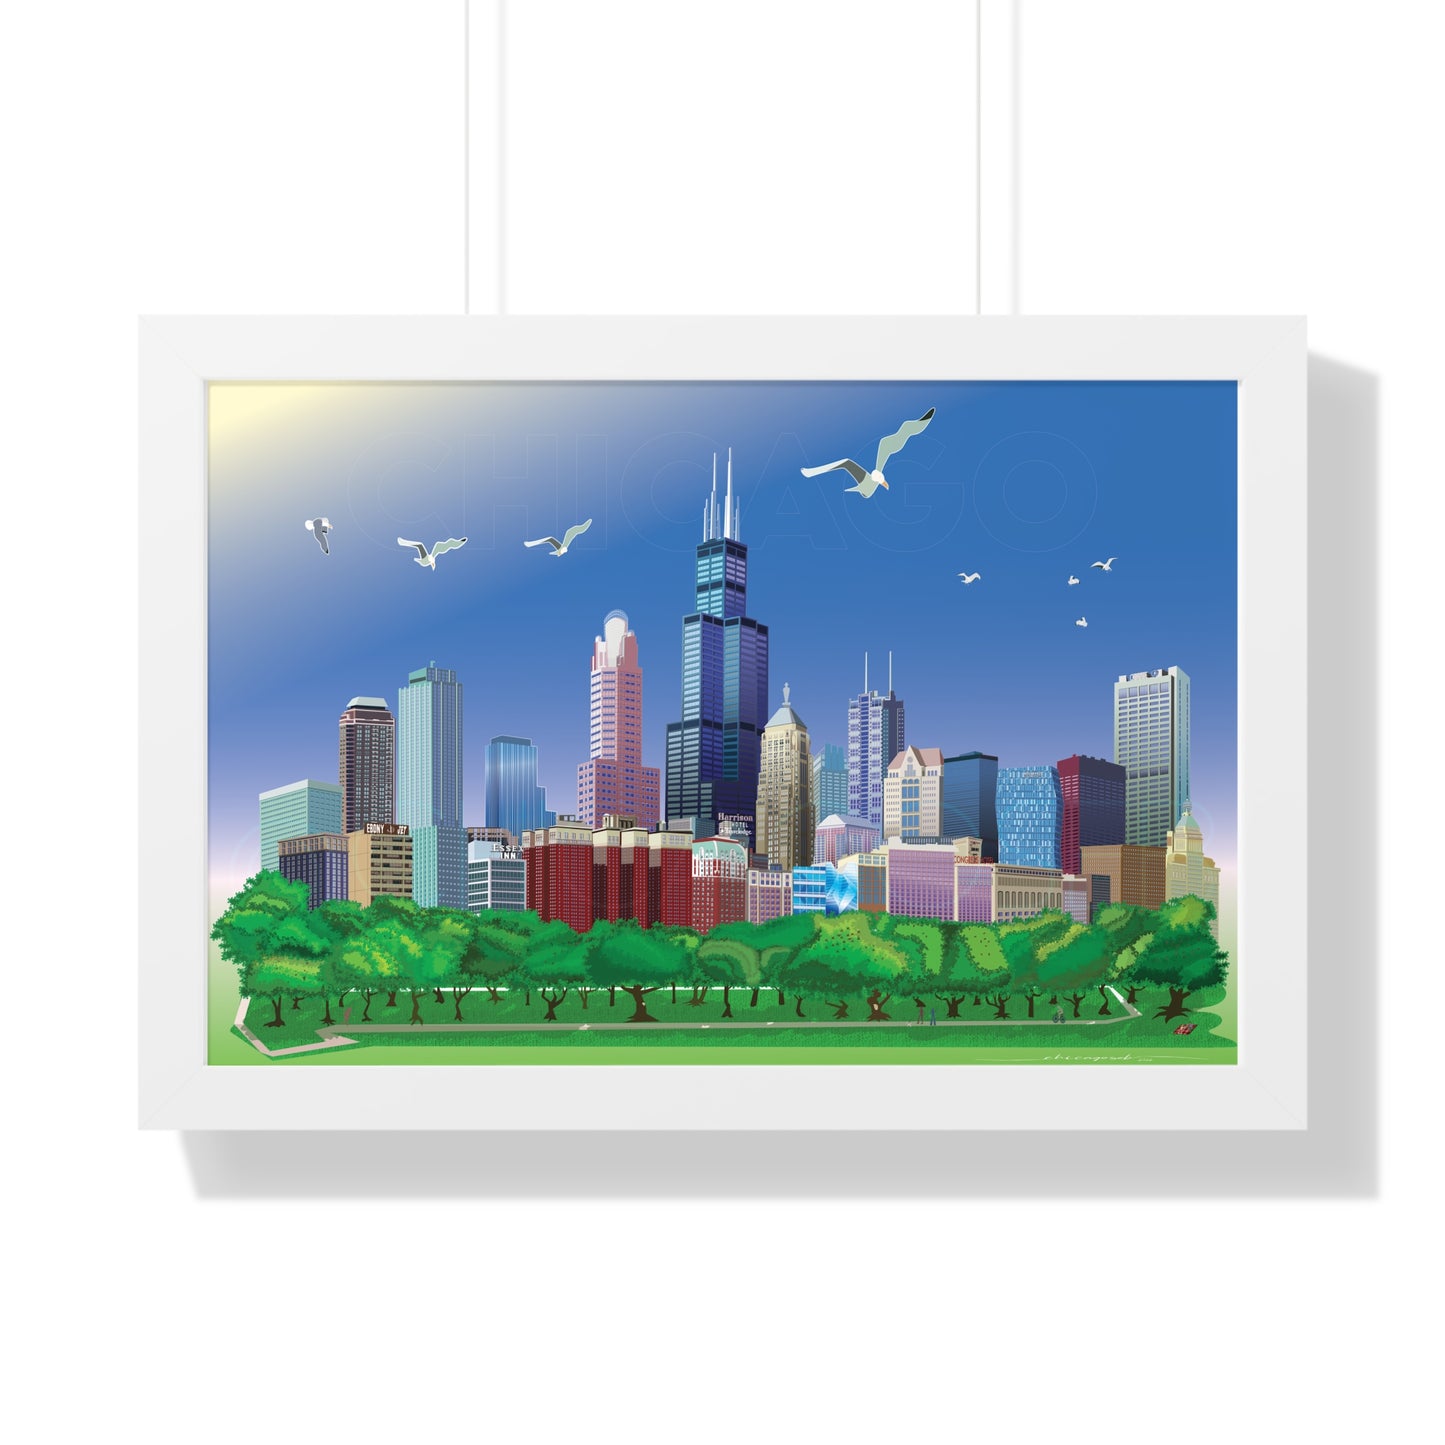 Chicago with Seagulls [Framed Poster Art Print]